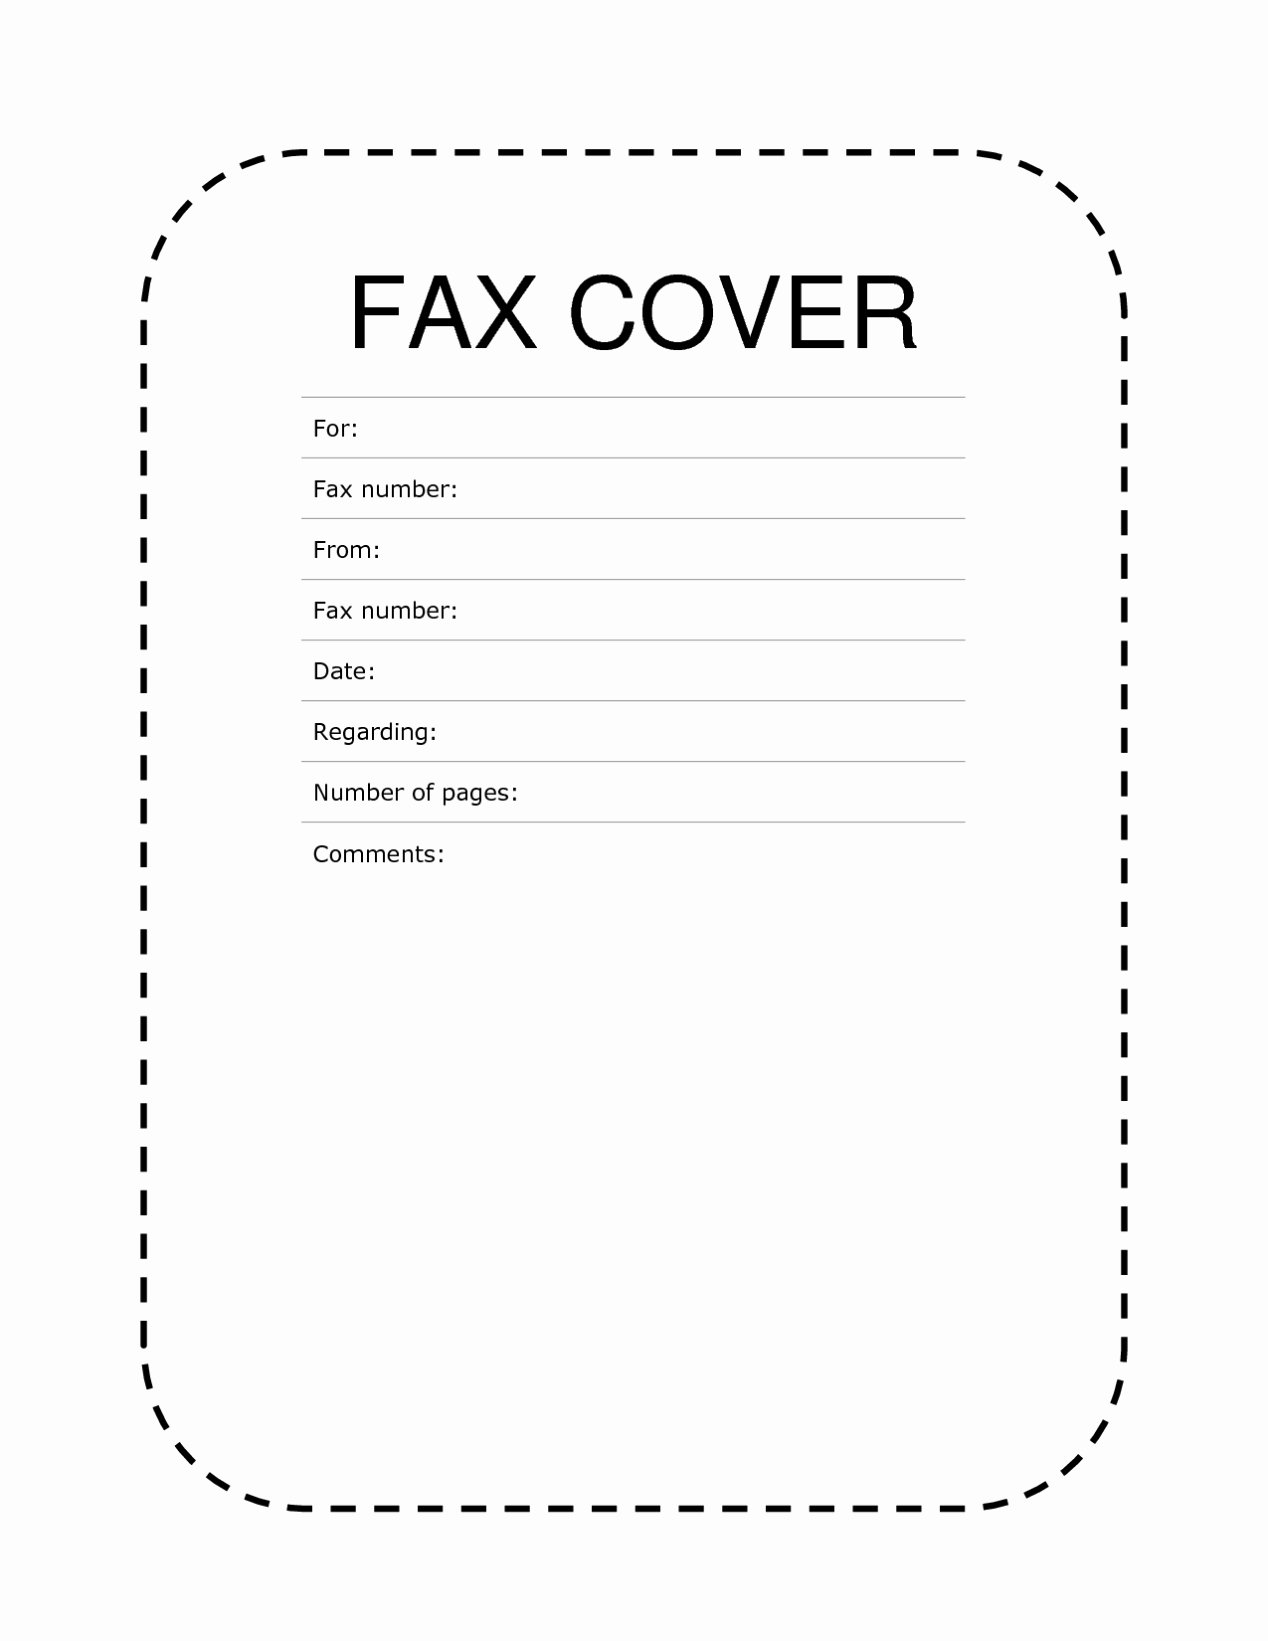 Free Printable Fax Cover Letter Awesome Free Printable Fax Cover Sheet Pdf Word Template Sample